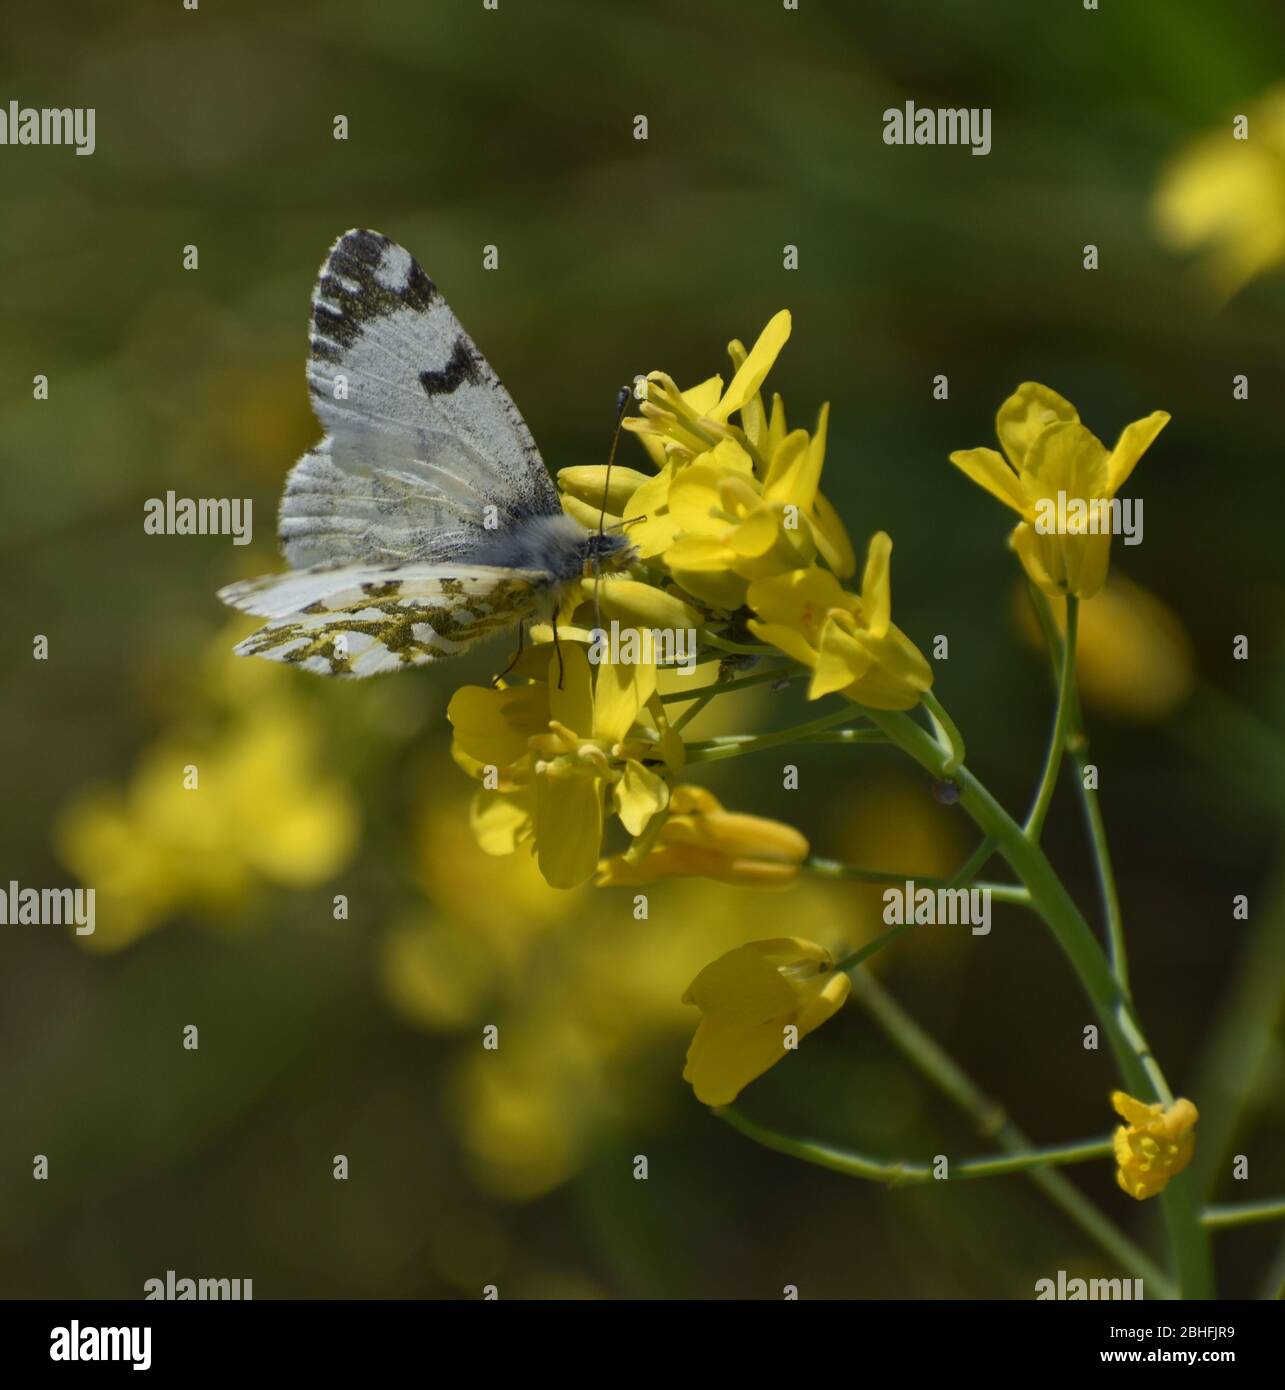 A spring white butterfly (Pontia sisymbrii) alights on the flowers of a black mustard (Brassica nigra) plant on Elkhorn Slough Stock Photo